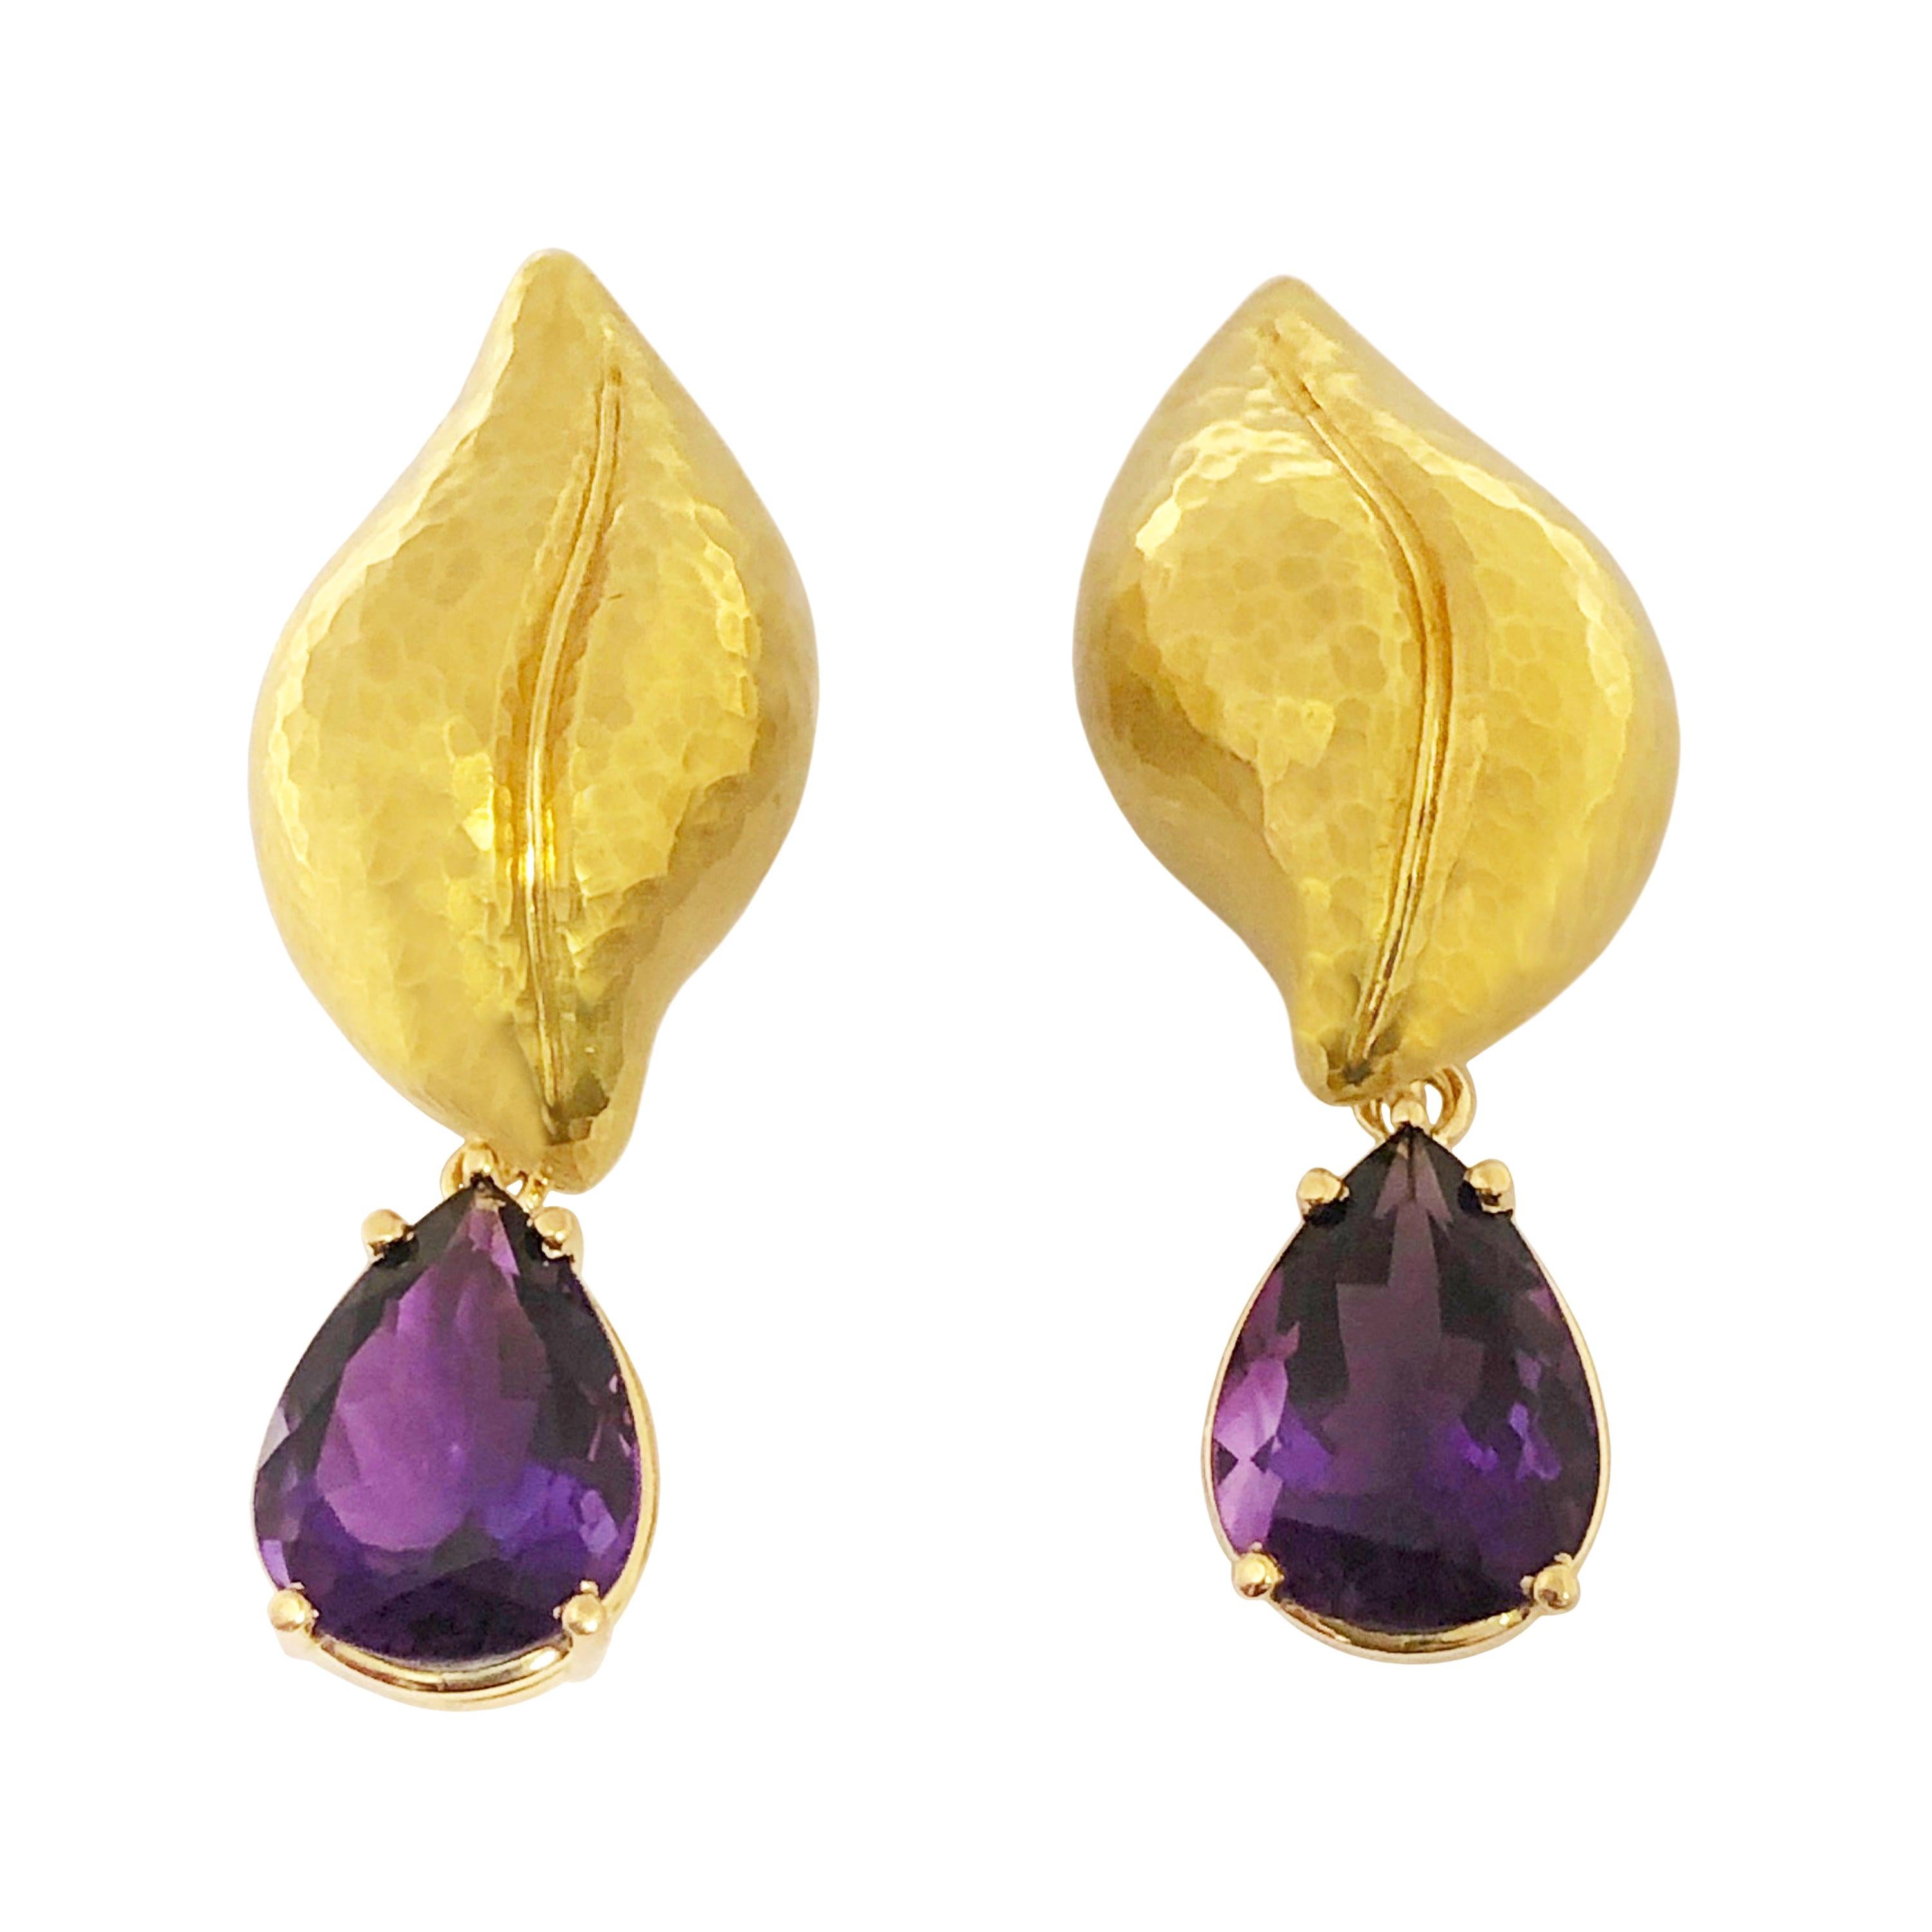 Tiffany & Co. Paloma Picasso Large Gold and Amethyst Convertible Earrings